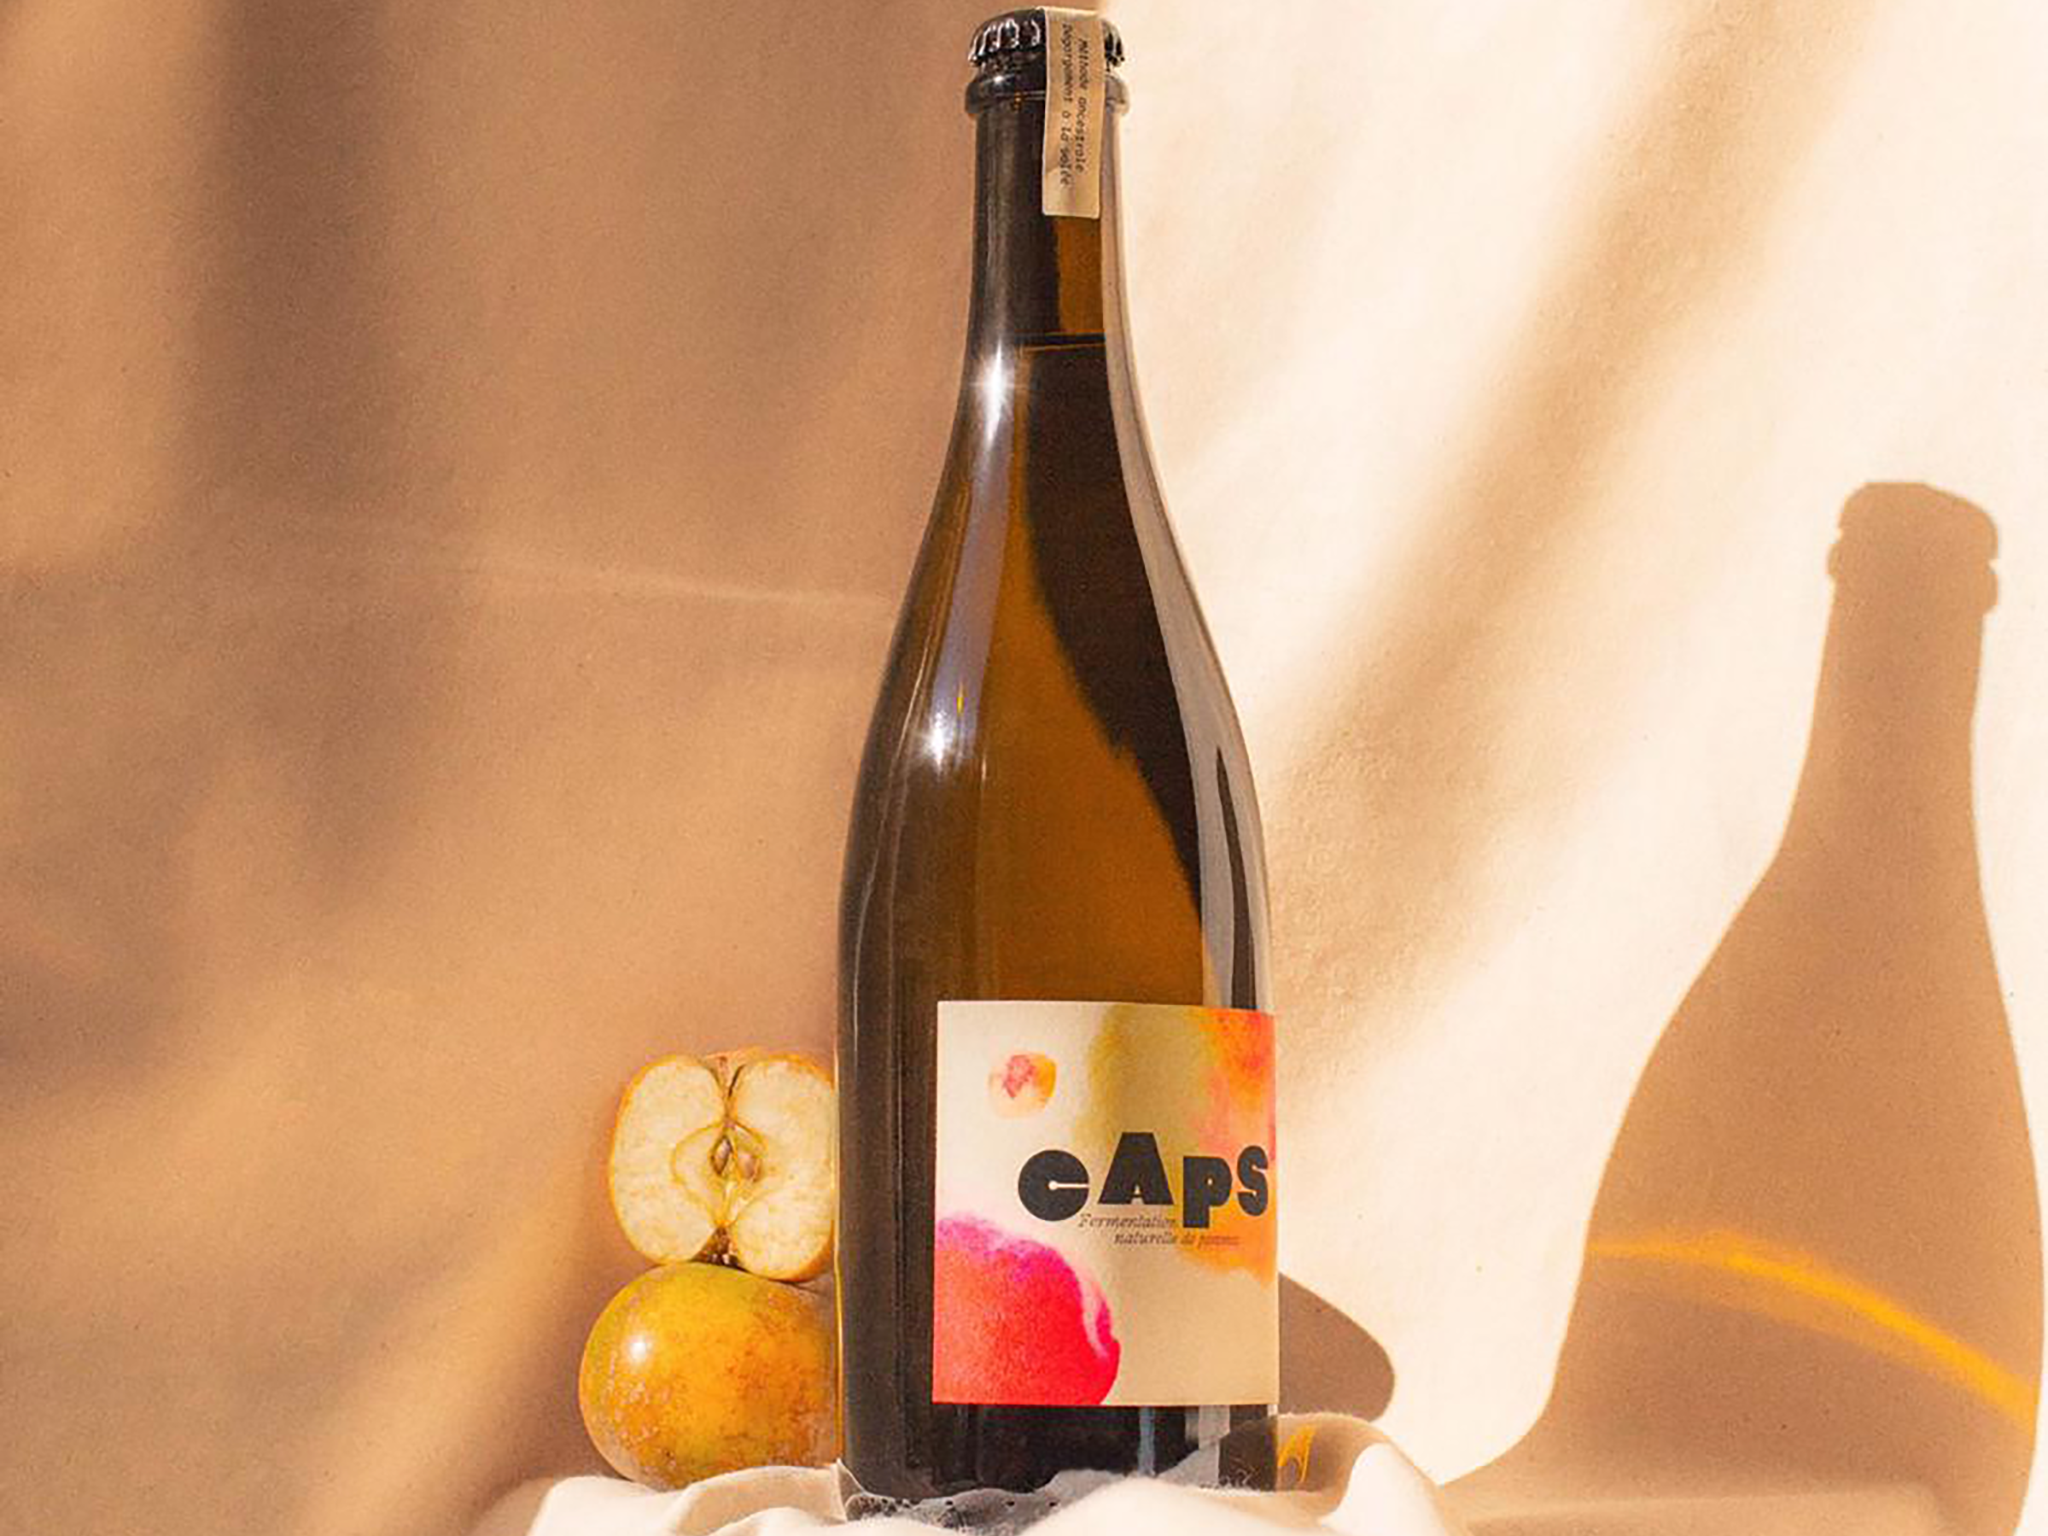 While the region is best known for its wine, La Cidrerie produces some delicious cider